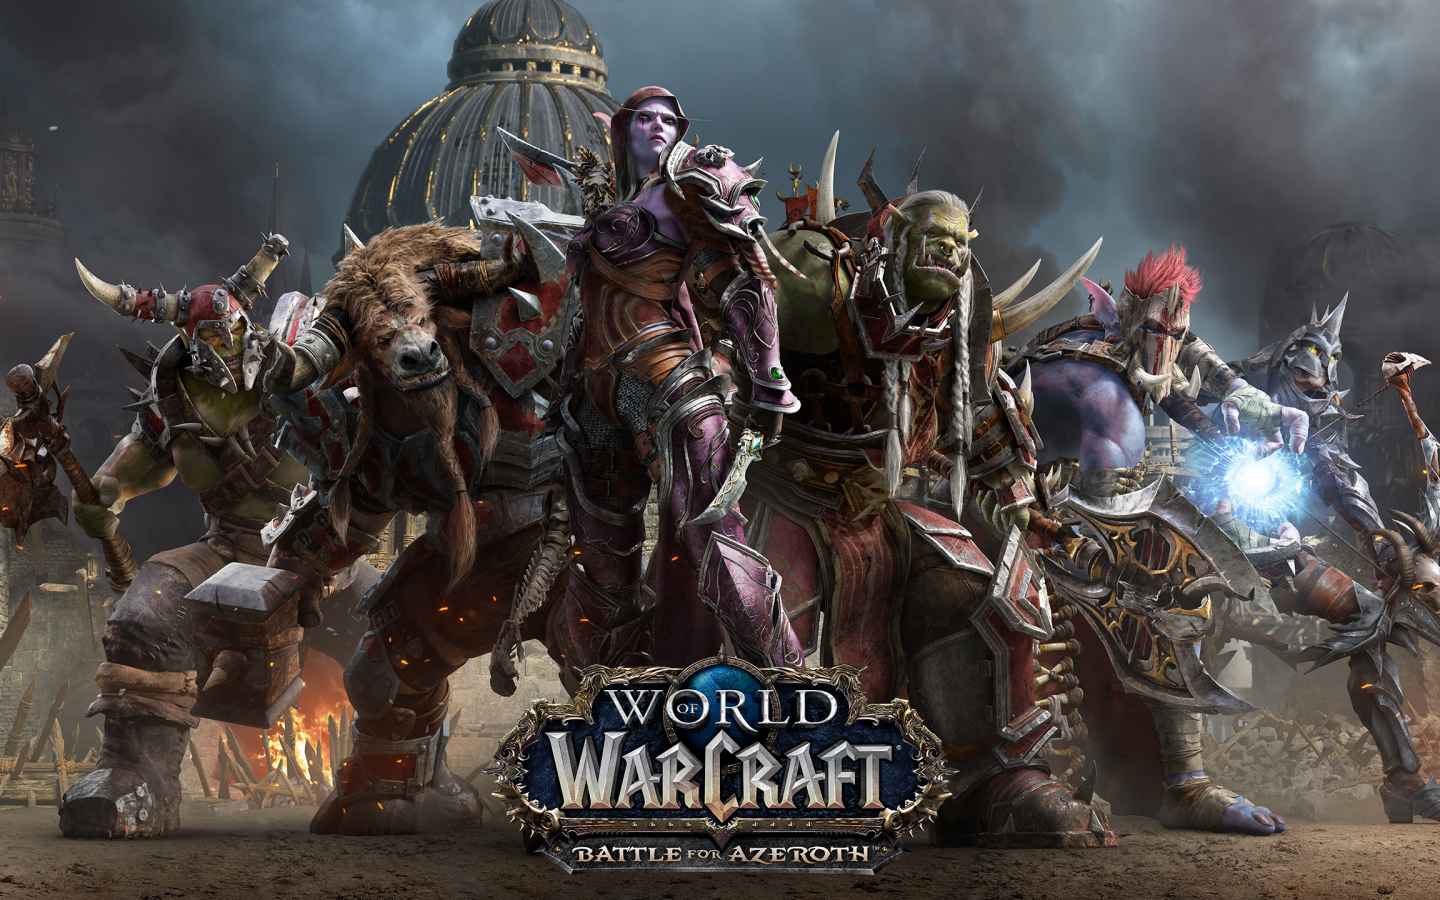 Characters of the new computer game World of Warcraft. Battle for Azeroth 2018